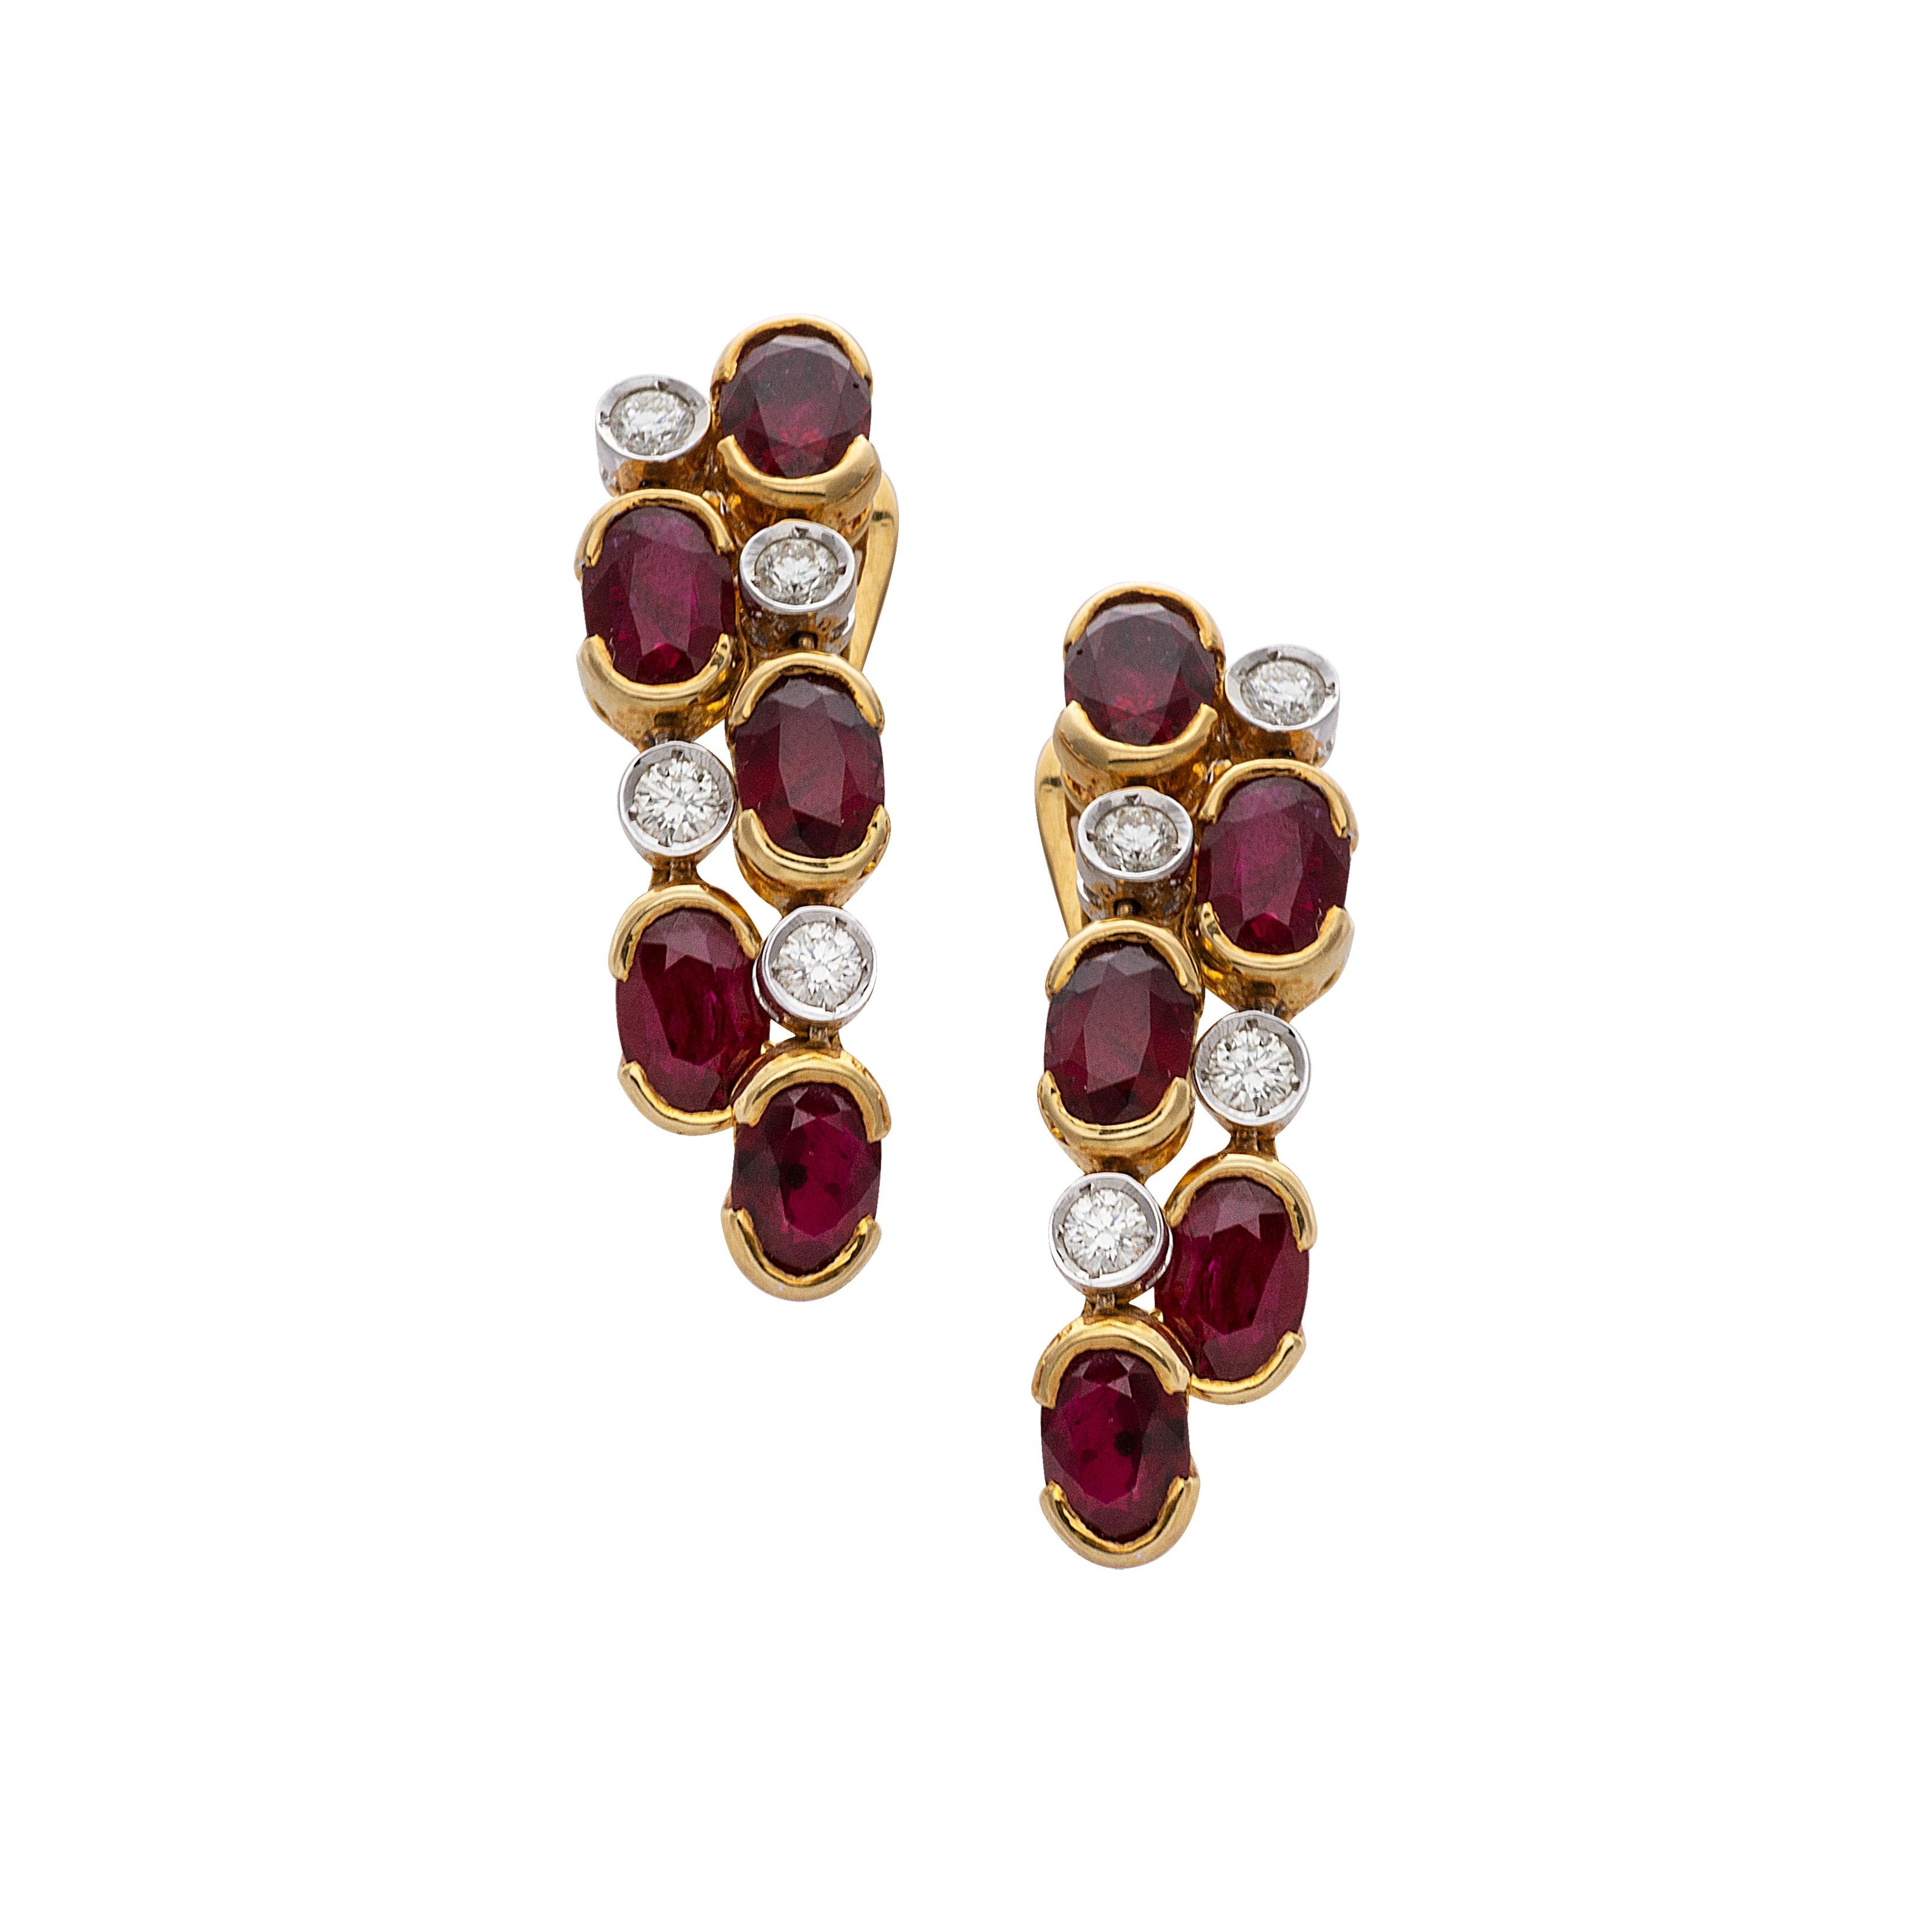 18 Karat Yellow Gold Ruby Diamond Necklace Set

Classy and elegant full set including necklace, earrings and ring set in 18 Karat yellow gold studded with diamonds (VVS-VS Purity) and gorgeous rubies with a beautiful dark red hue. Perfect for